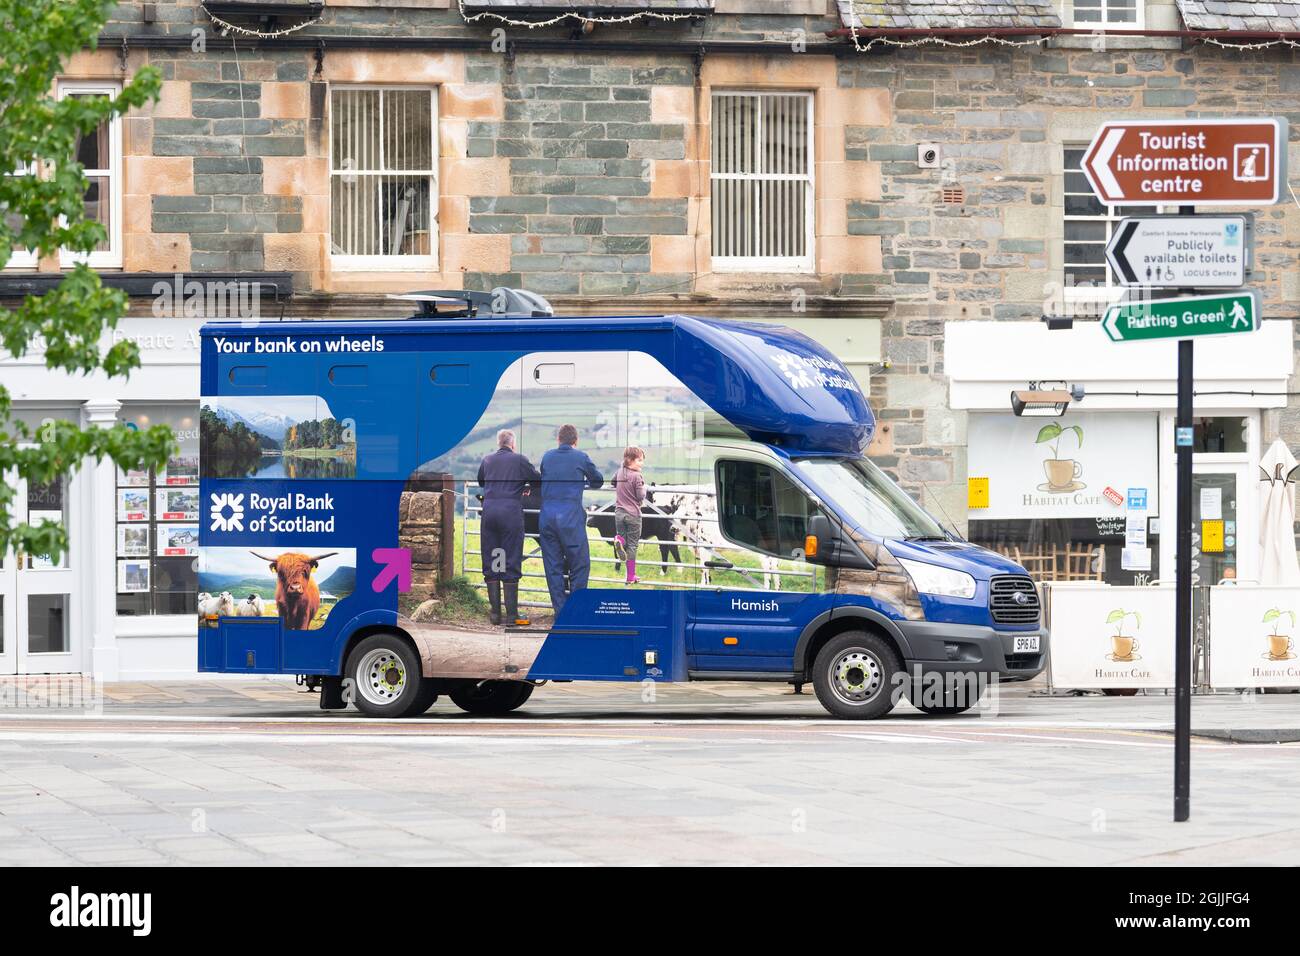 RBS Royal Bank of Scotland mobile branch van parked in Aberfeldy, Perth and Kinross, Scotland,UK Stock Photo